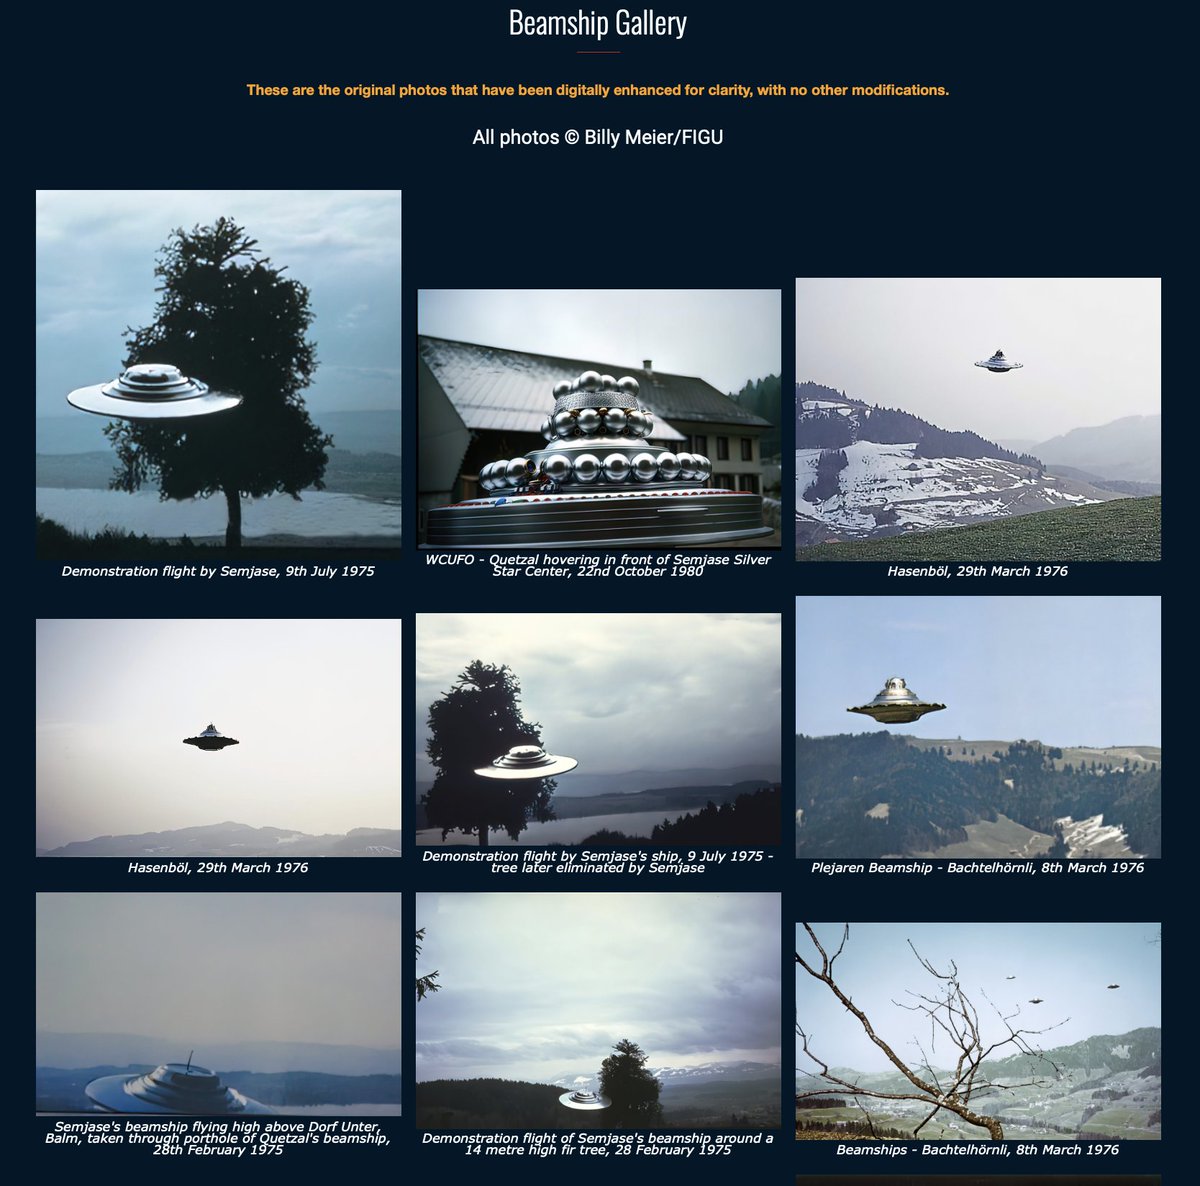 #UAPstudies #UFOs #BillyMeier Why Do They All Want to Steer the Ship of Fools? The sudden proliferation of groups, “societies', etc., who use the term UAP reveal their dependence on the “official narrative” theyflyblog.com/?p=32821